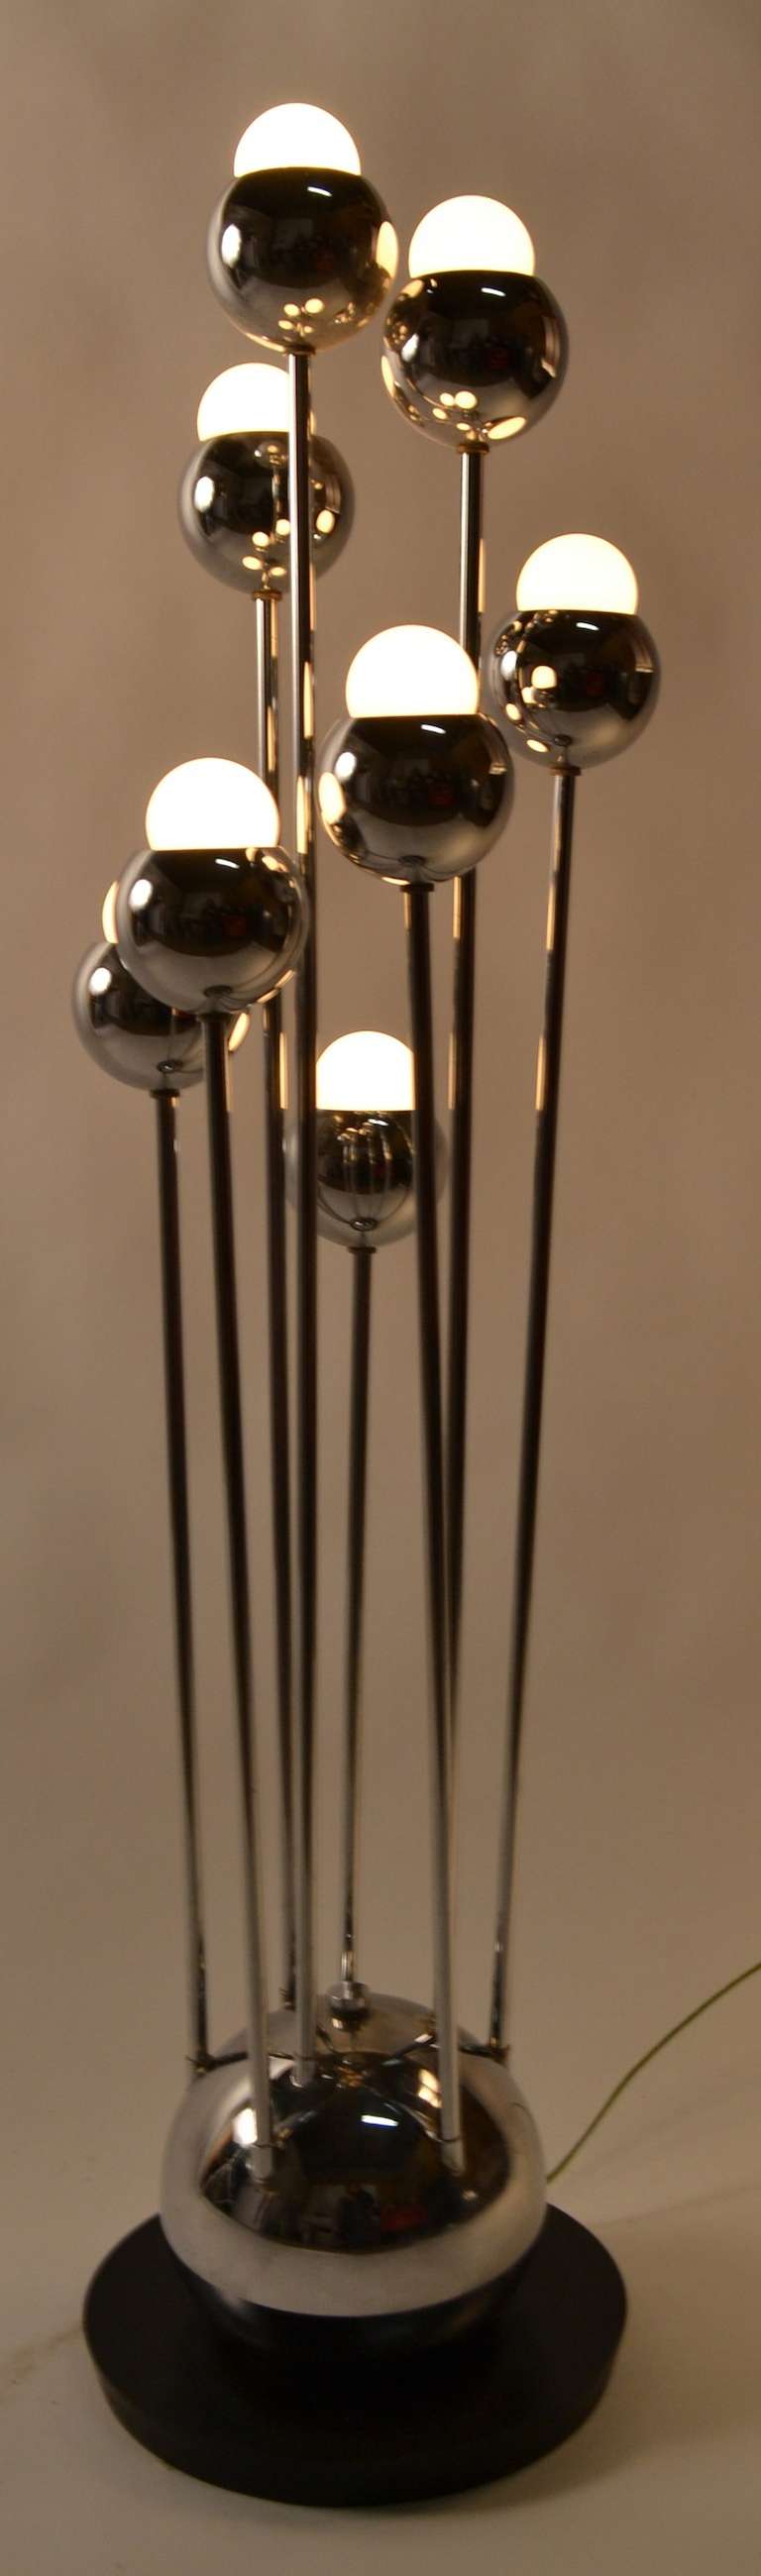 Post Modern Art Deco Revival decorative table lamp. The three way switch enables three distinct light combinations. Bright chrome arms, and ball base, mounted on disk form black base. Working, clean and original.